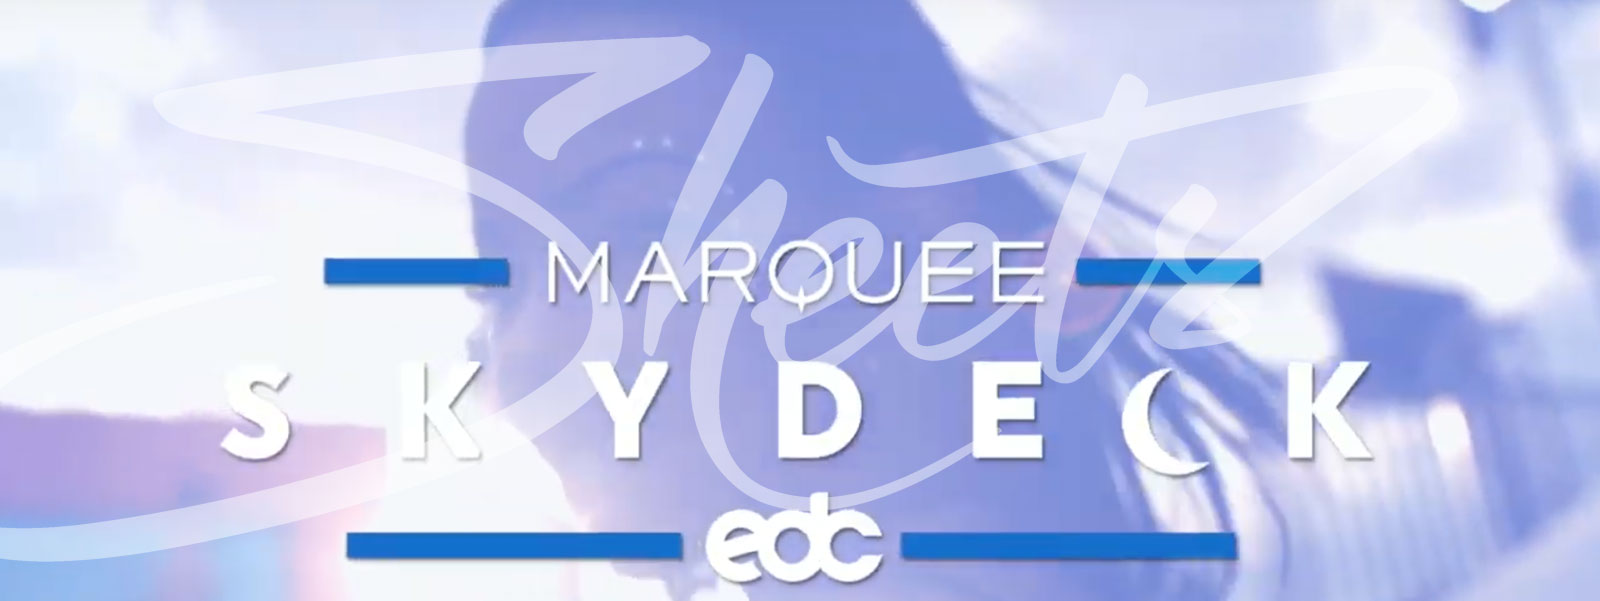 Marquee SkyDeck EDC Table Reservations Las Vegas 